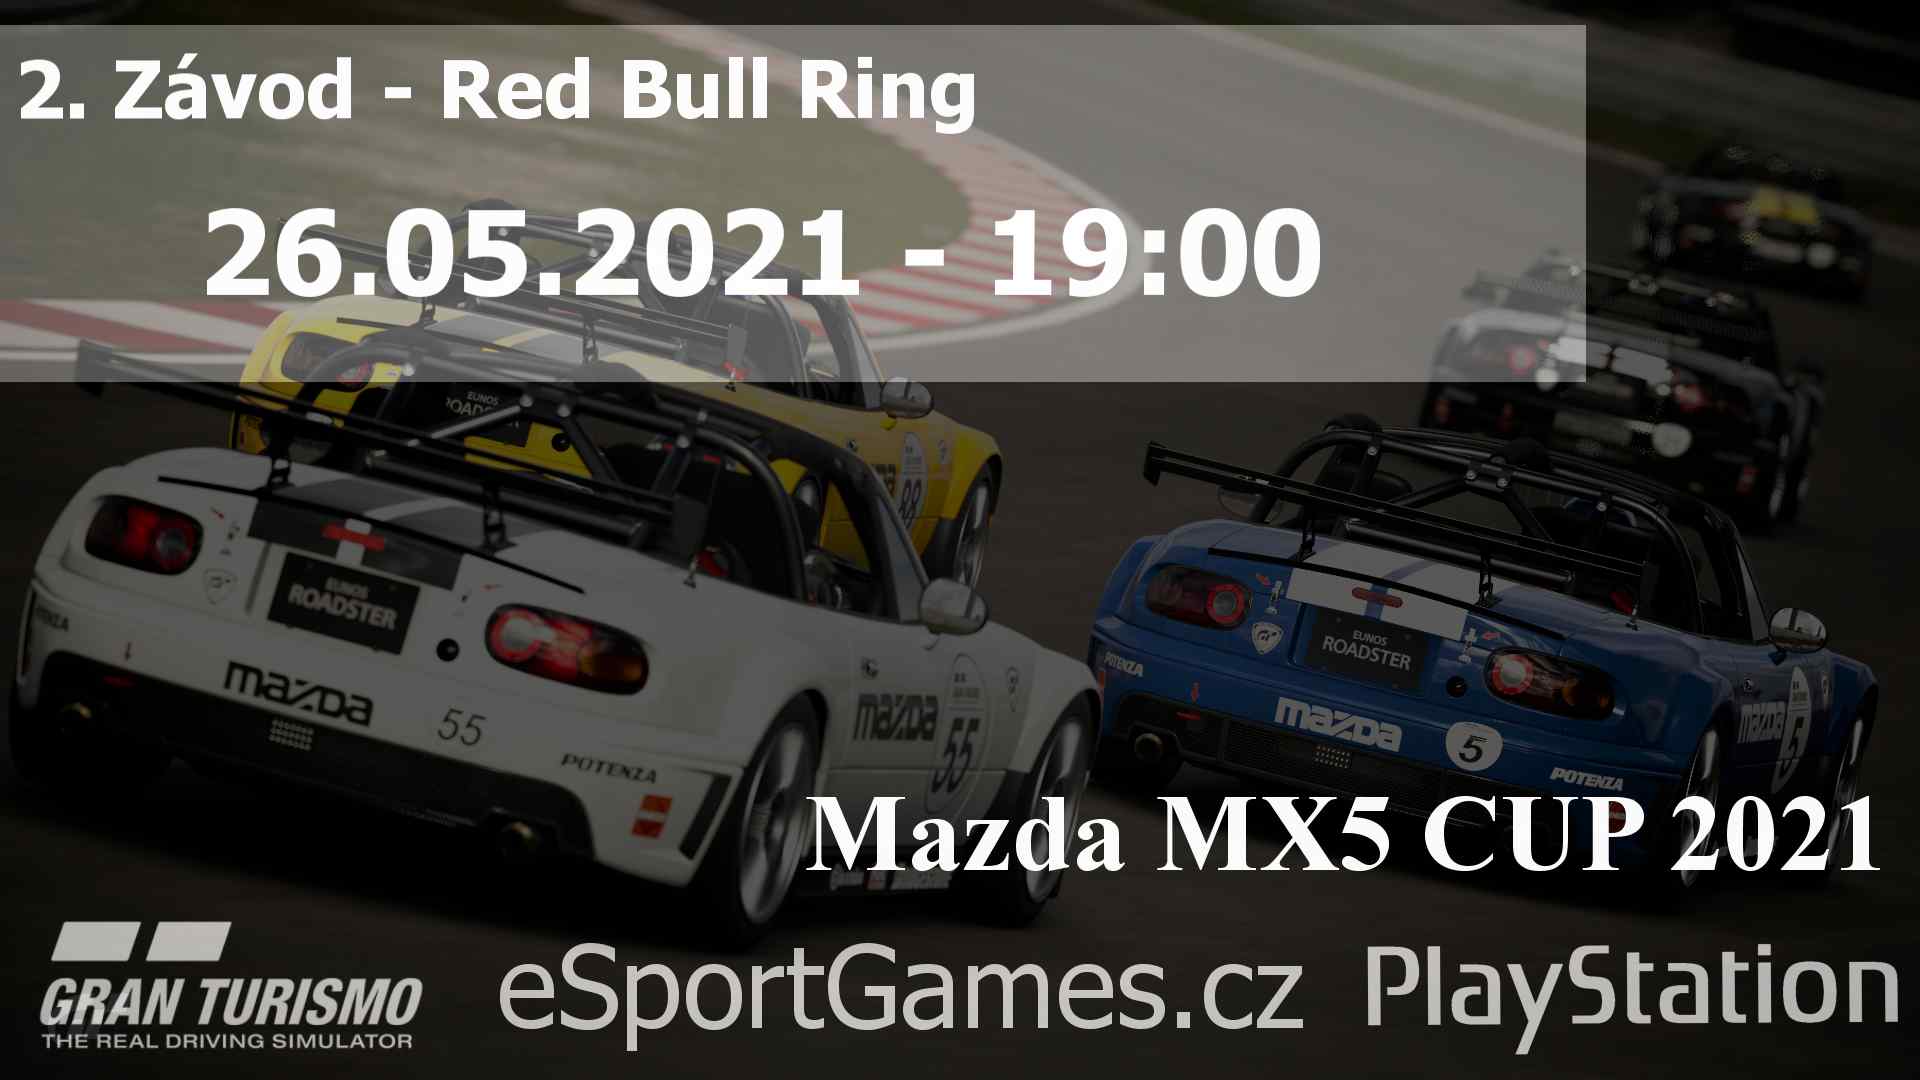 2. Závod - MX5 CUP 2021 - Red Bull Ring